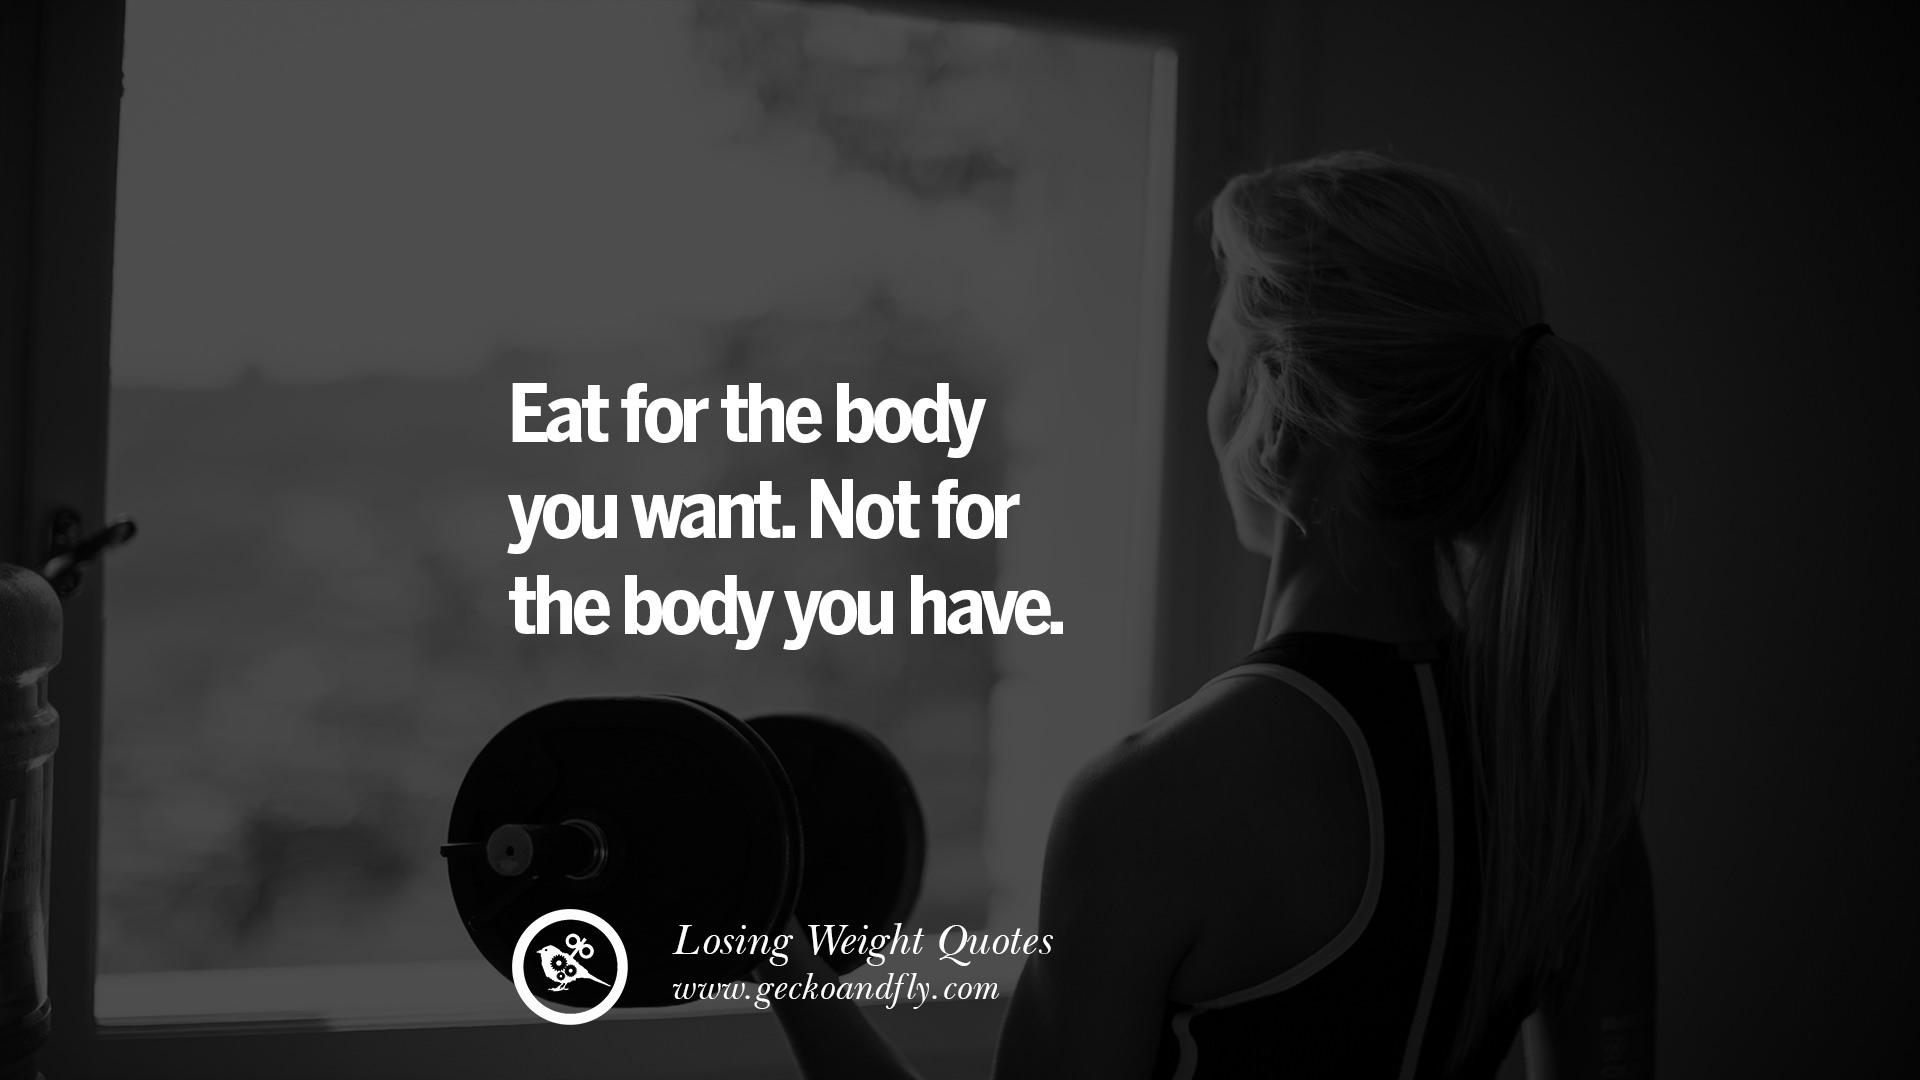 Motivating Quotes On Losing Weight, On Diet And Living Healthy